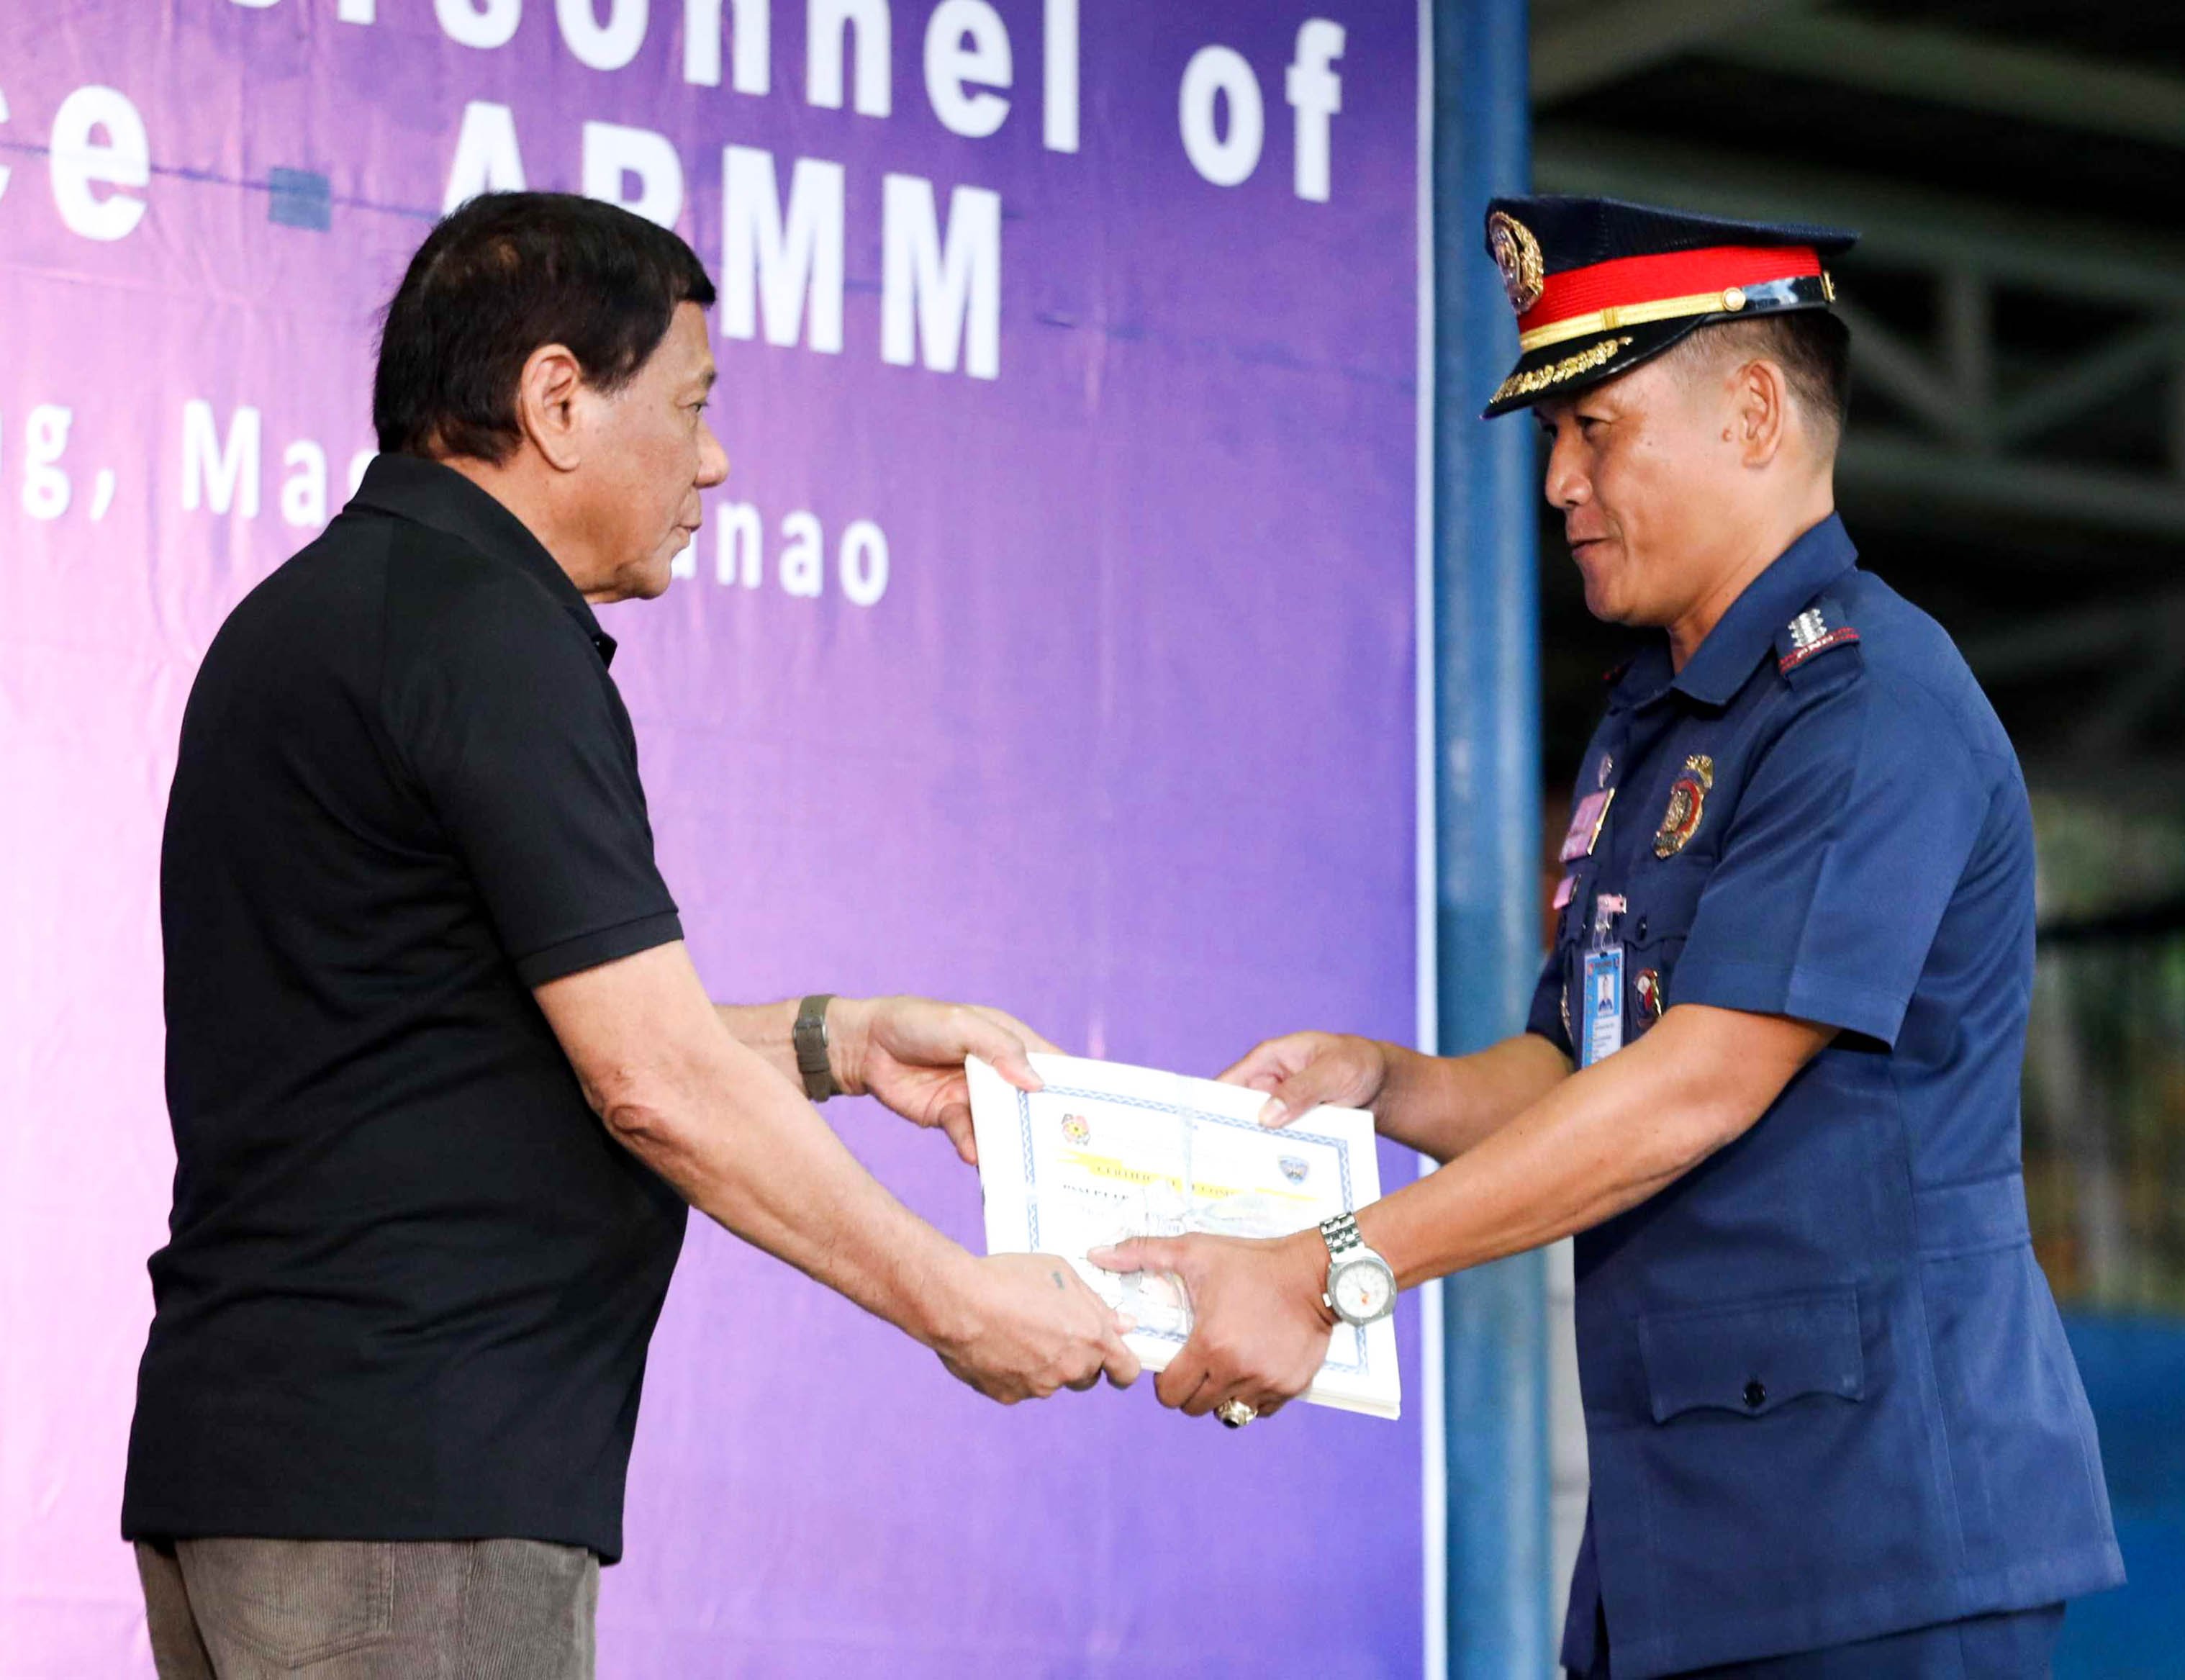 OUSTANDING POLICE OFFICERS HONORED. Pres. Duterte presents awards at the ARMM Police HQ in Maguindanao